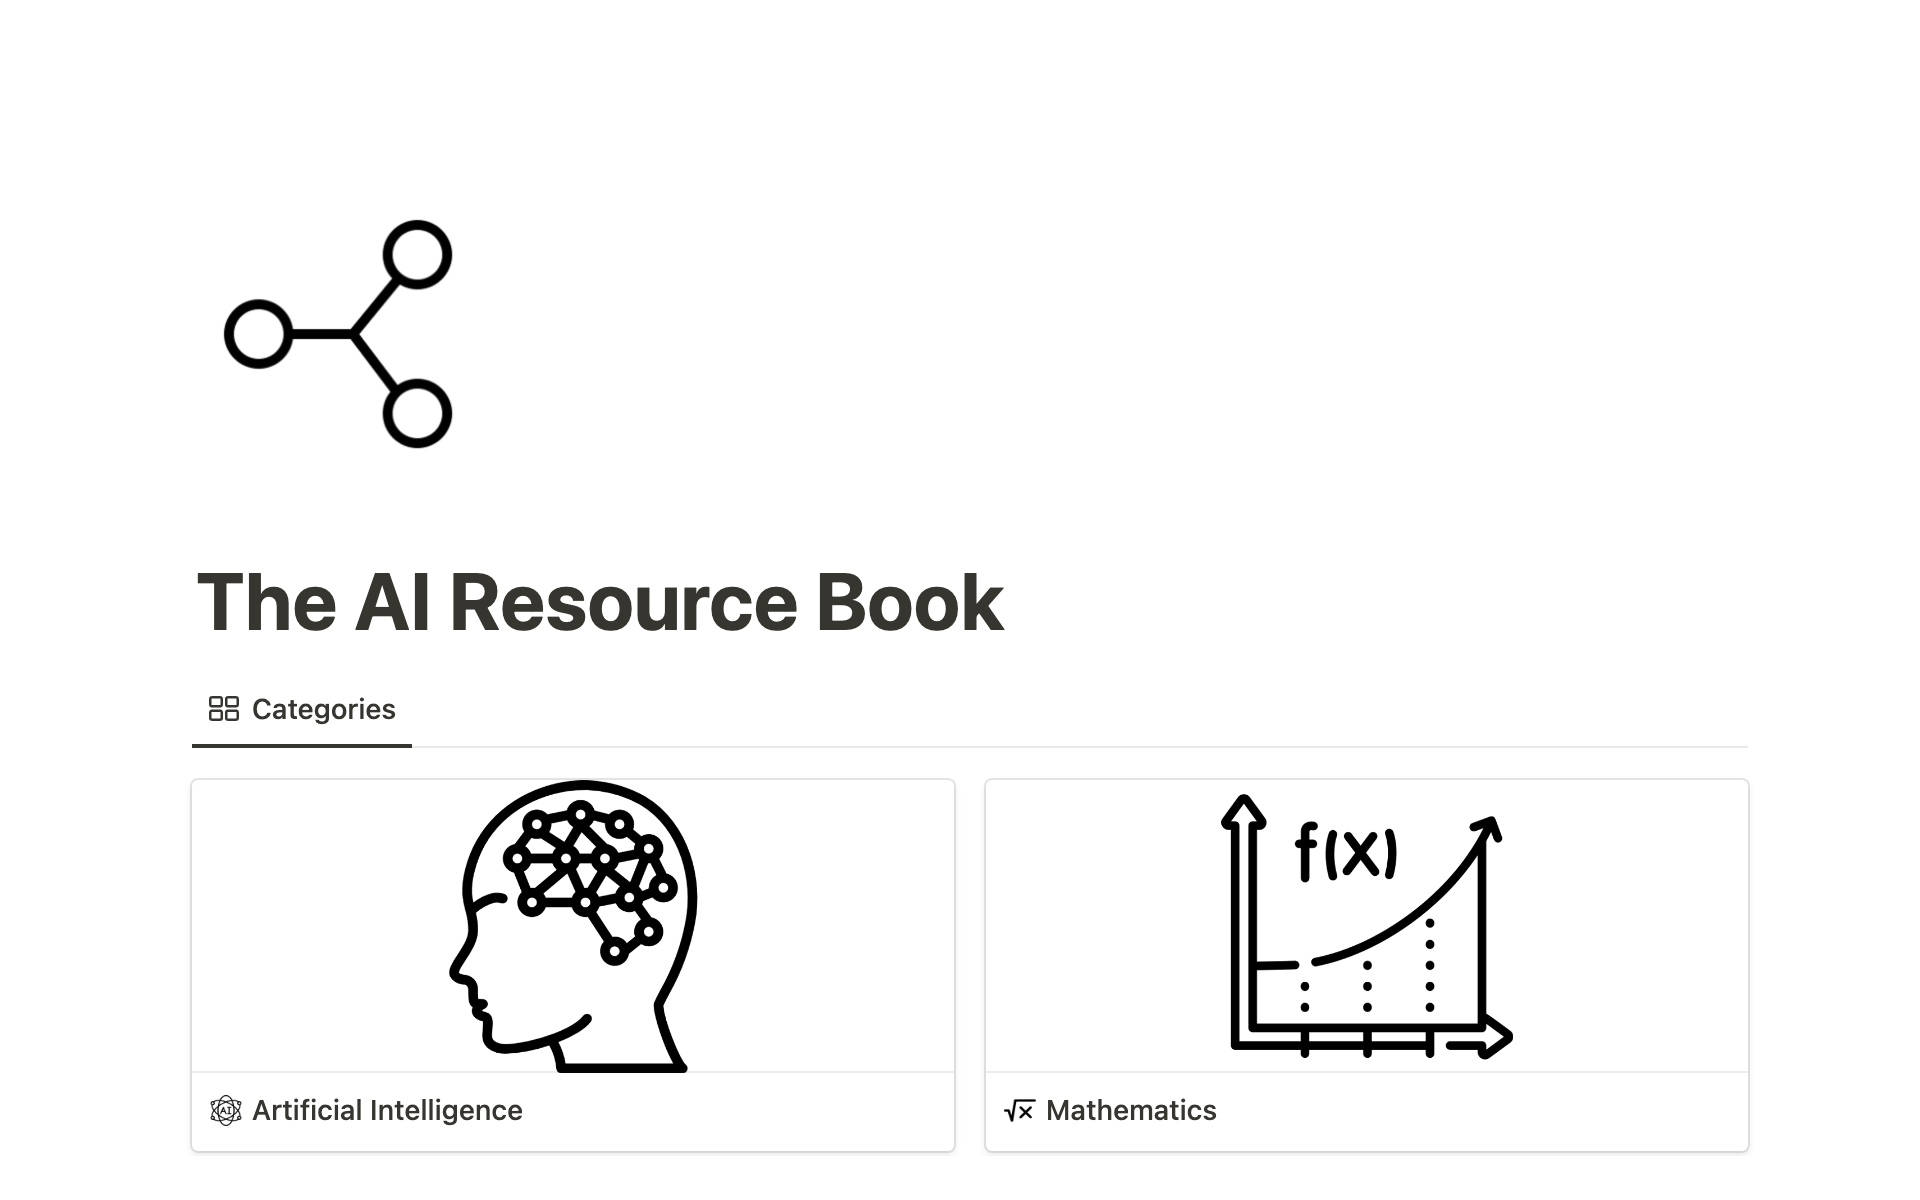 This resource book contains 257+ resources to help someone become an AI master and can be used to learn everything about AI, with the recommendation to purchase and use it to start building AI creations.